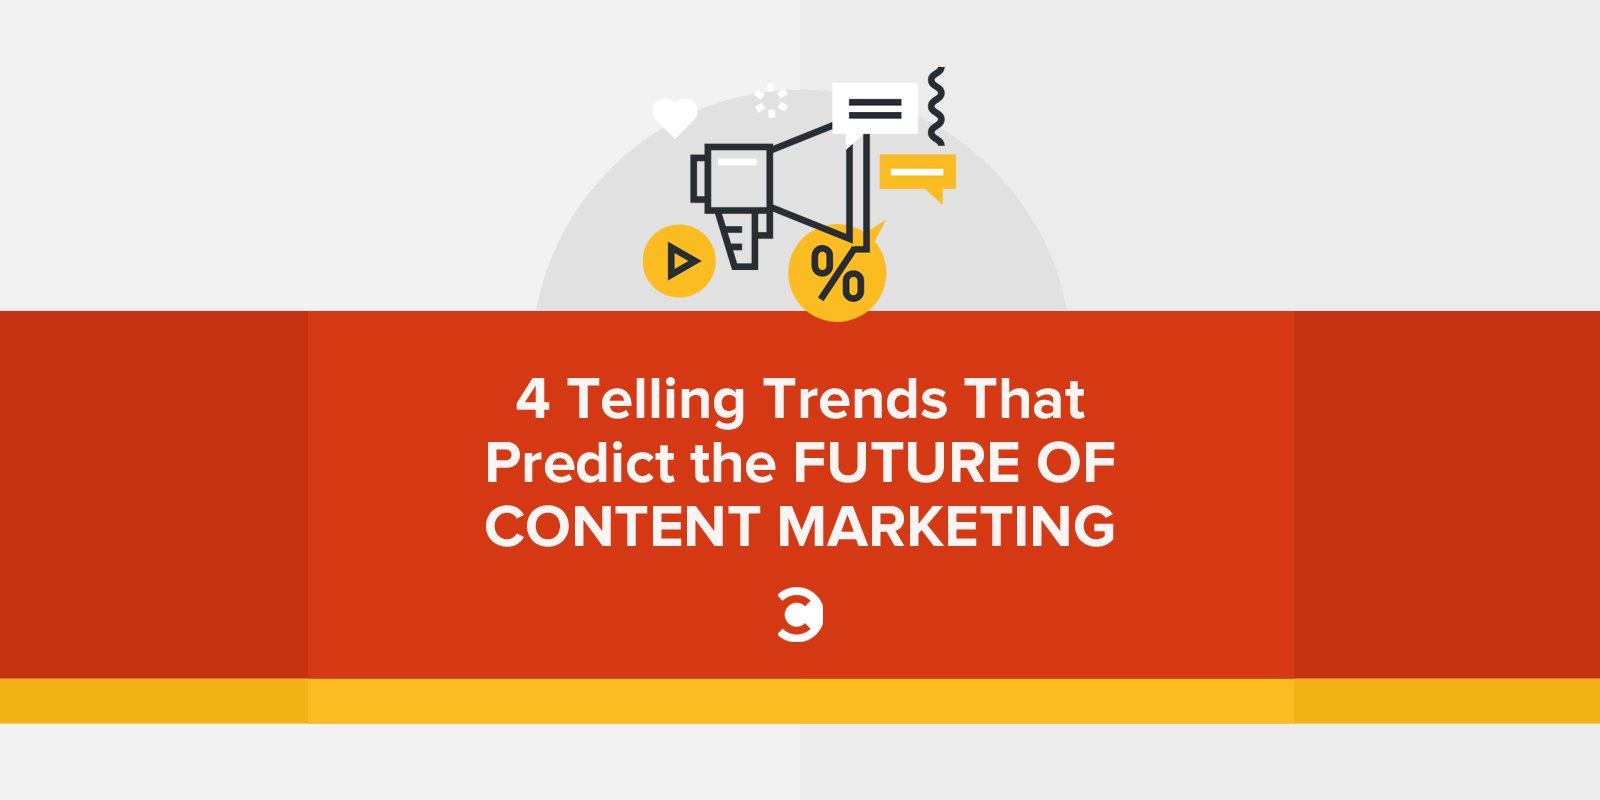 4 Telling Trends That Predict the Future of Content Marketing